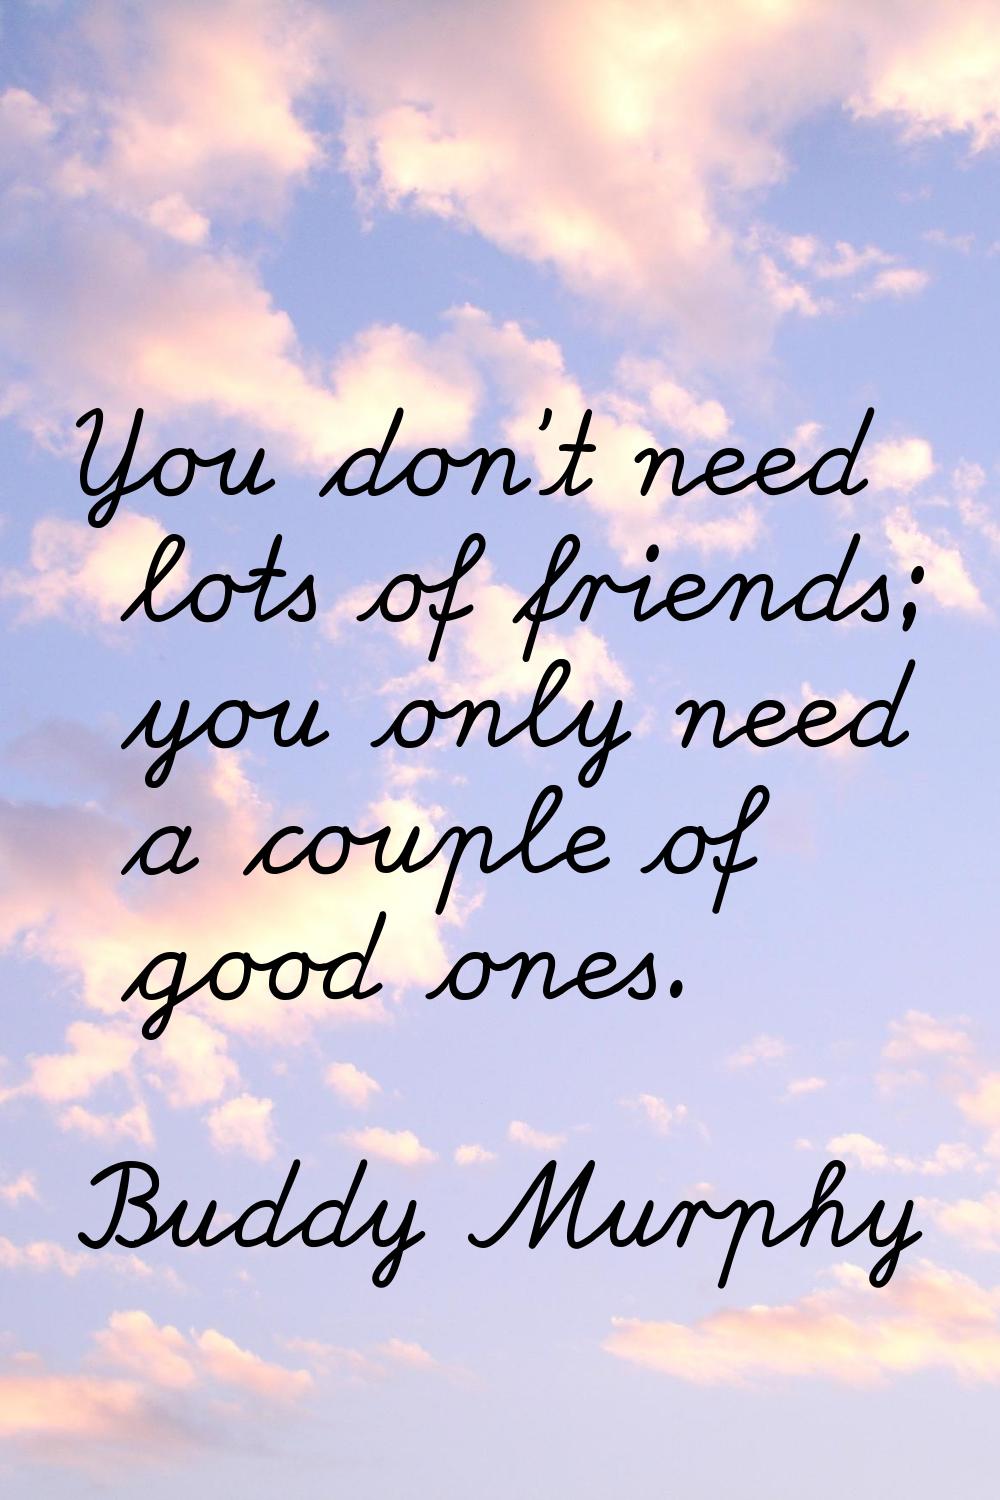 You don't need lots of friends; you only need a couple of good ones.